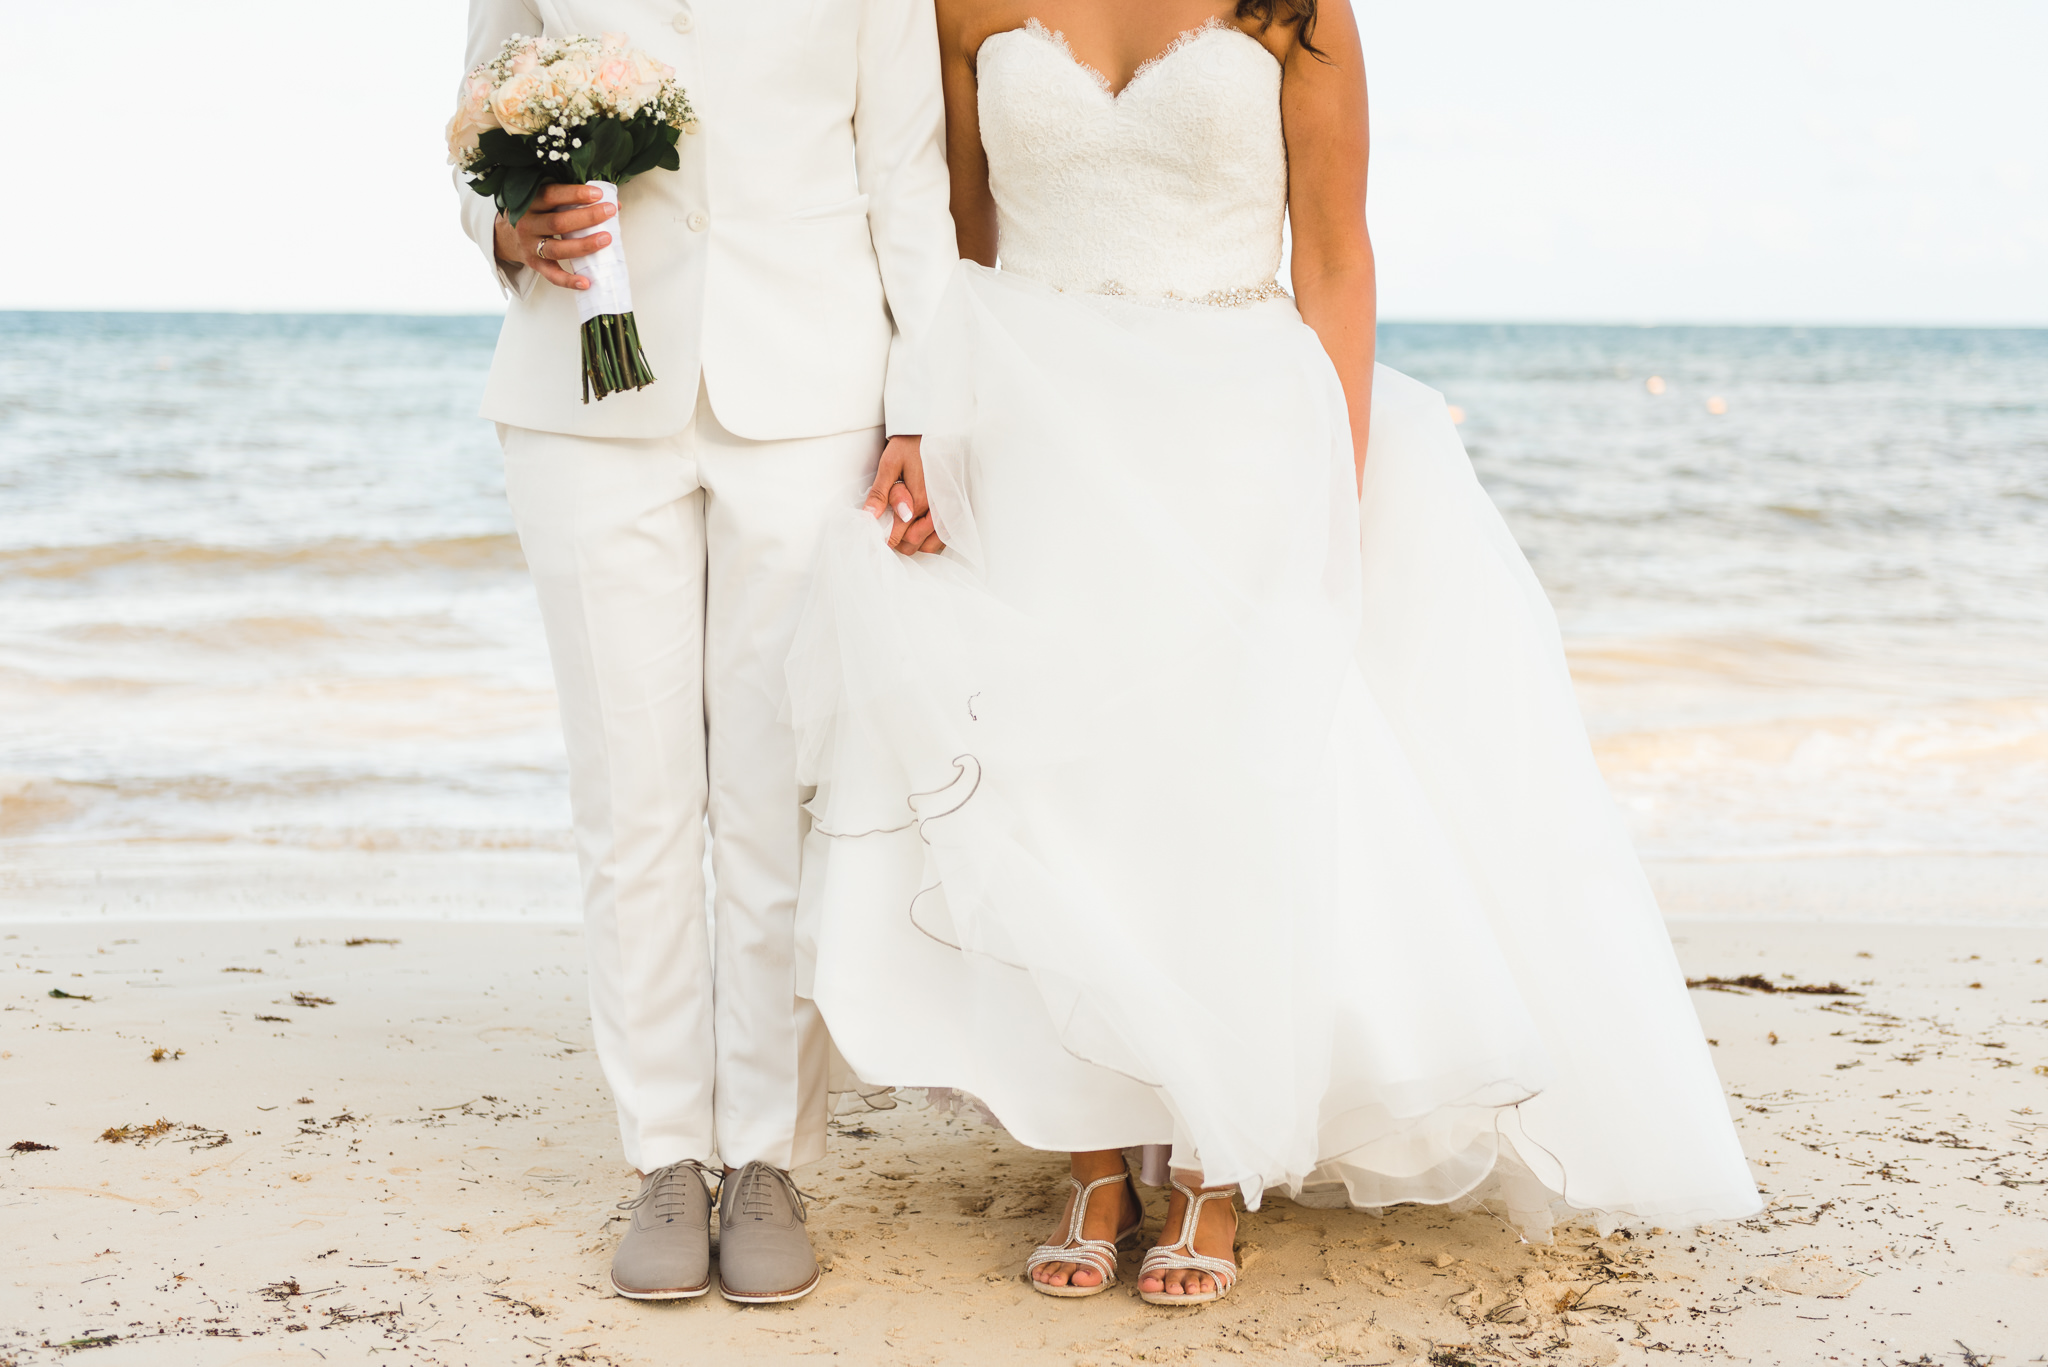 brides standing side by side on the beach holding hands and bouquet after ceremony at Now Sapphire Resort in Mexico